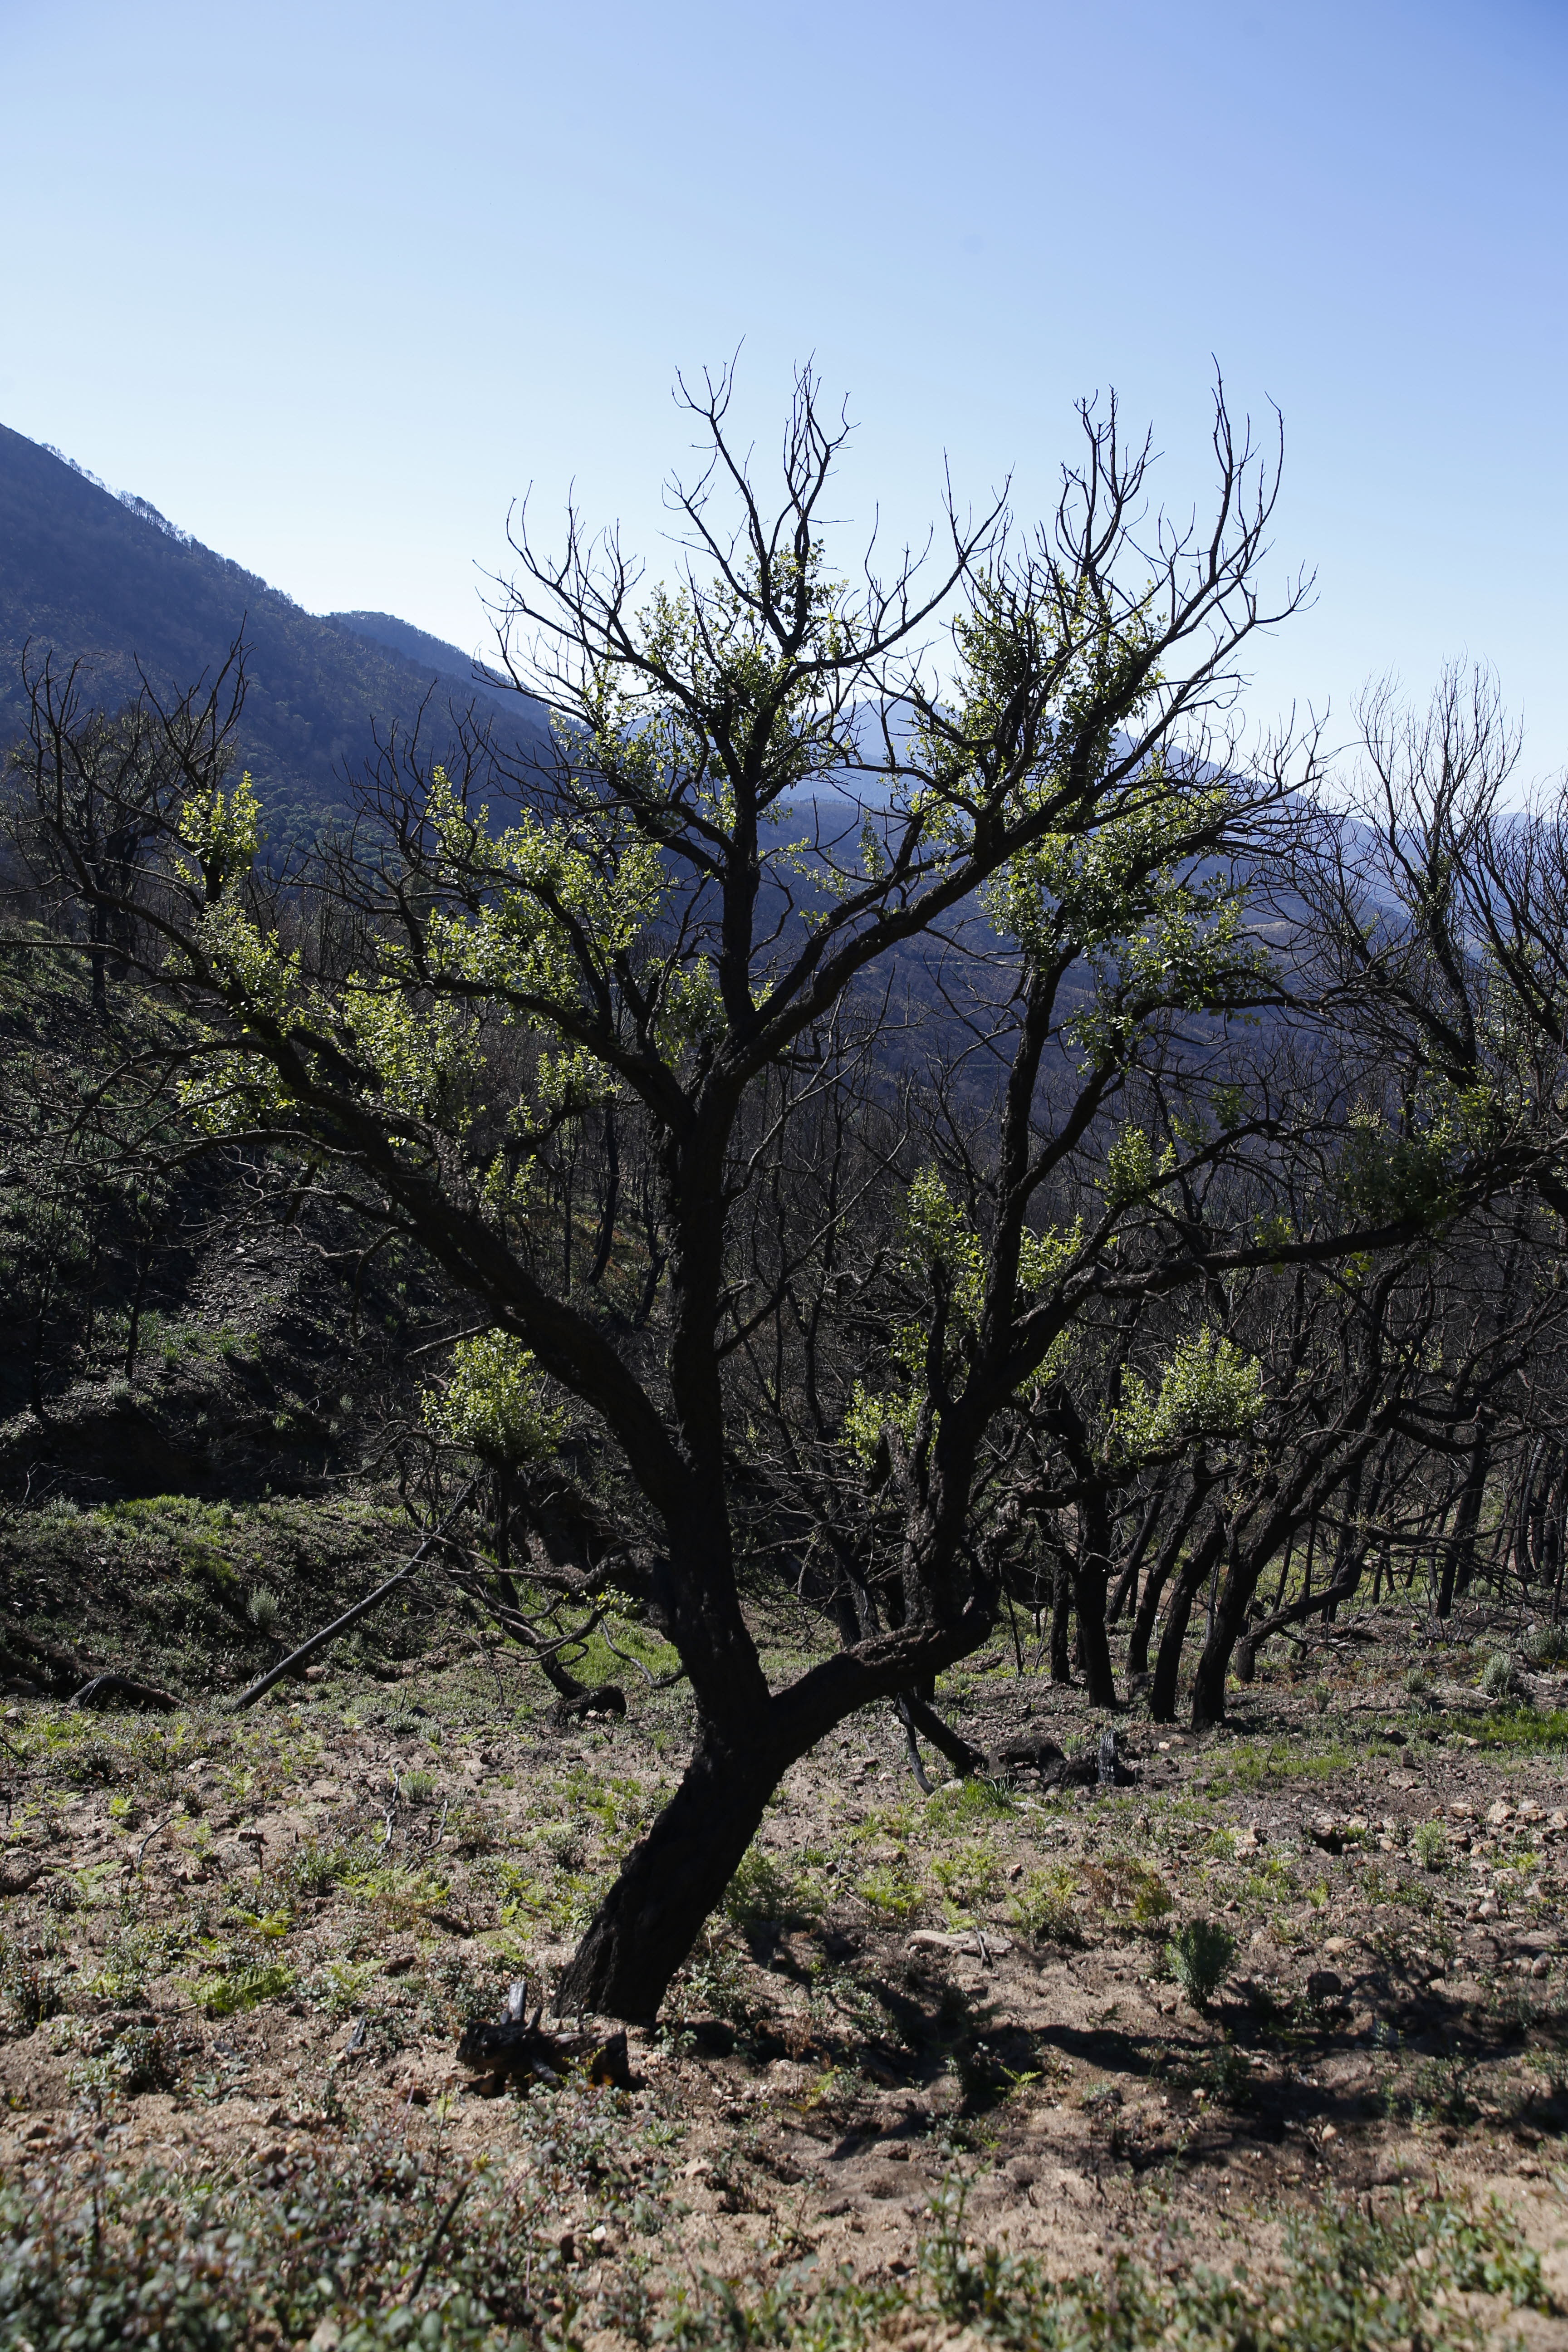 More than 9,000 hectares of woodland were destroyed by last year's fire. A visit to the area, six months later, shows how nature is starting to make a recovery in the Genal Valley